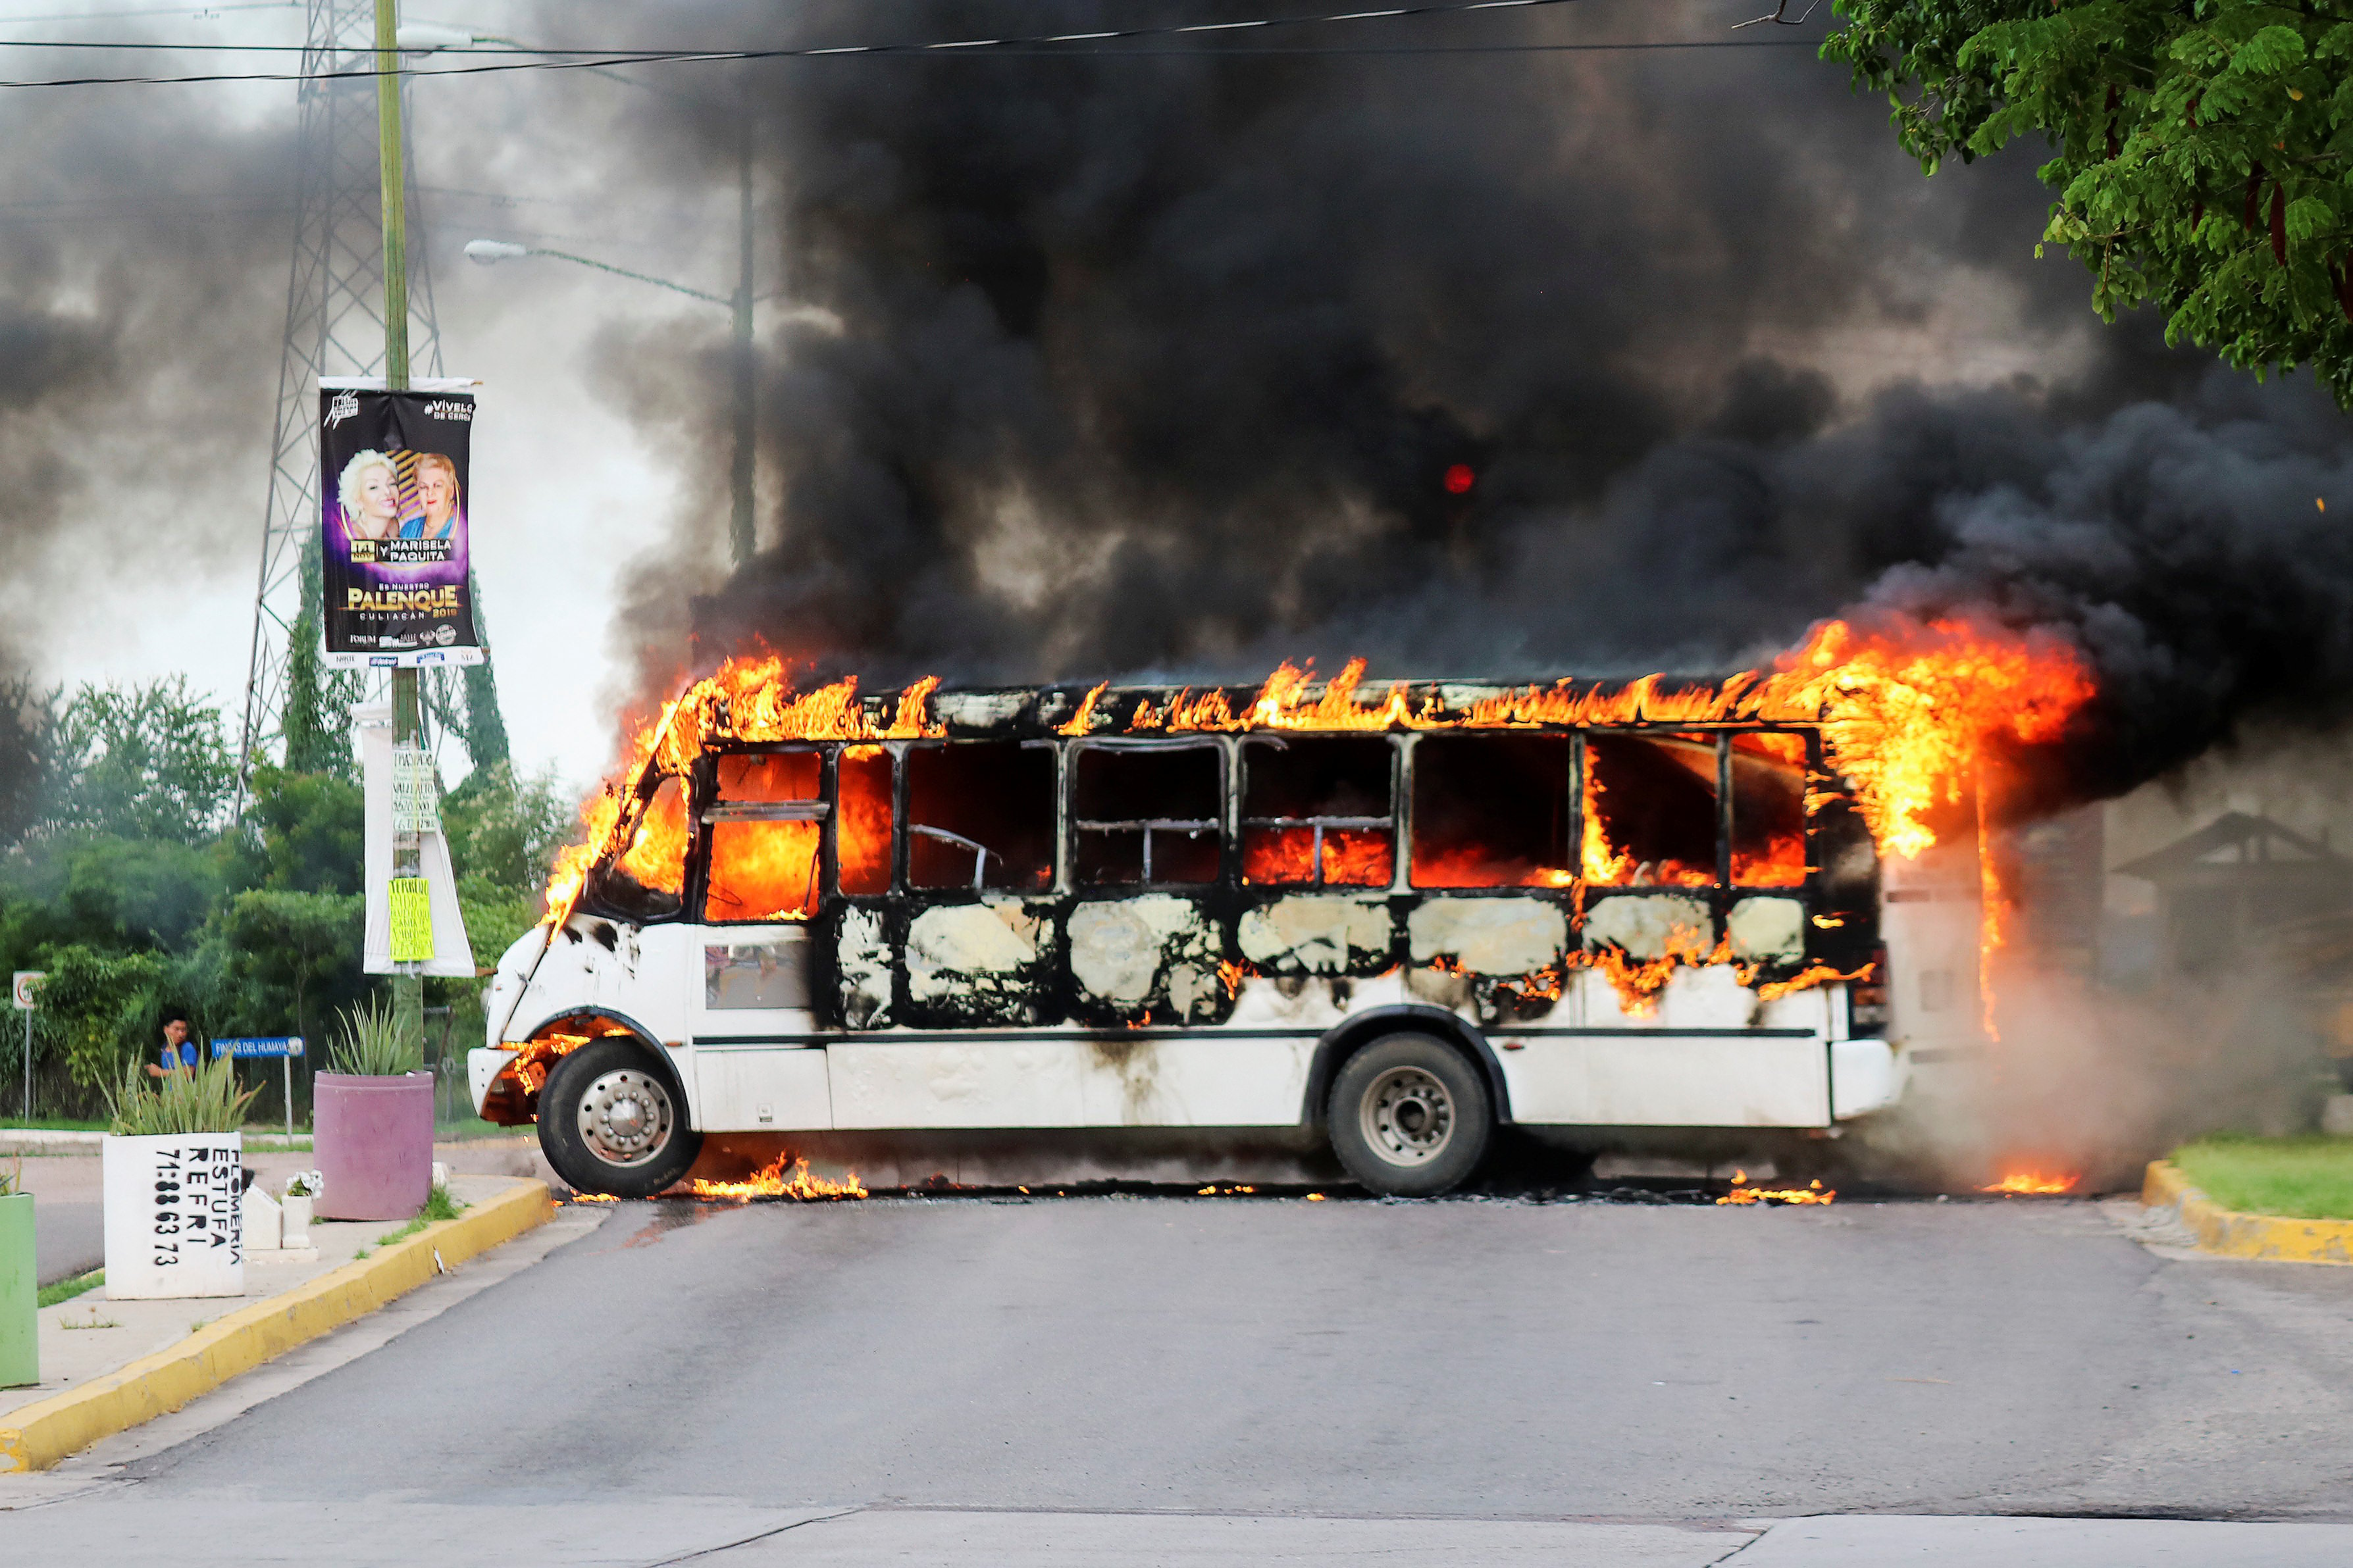 A burning bus, set alight by cartel gunmen to block a road, is pictured during clashes with federal forces following the detention of Ovidio Guzman, son of drug kingpin Joaquin "El Chapo" Guzman, in Culiacan